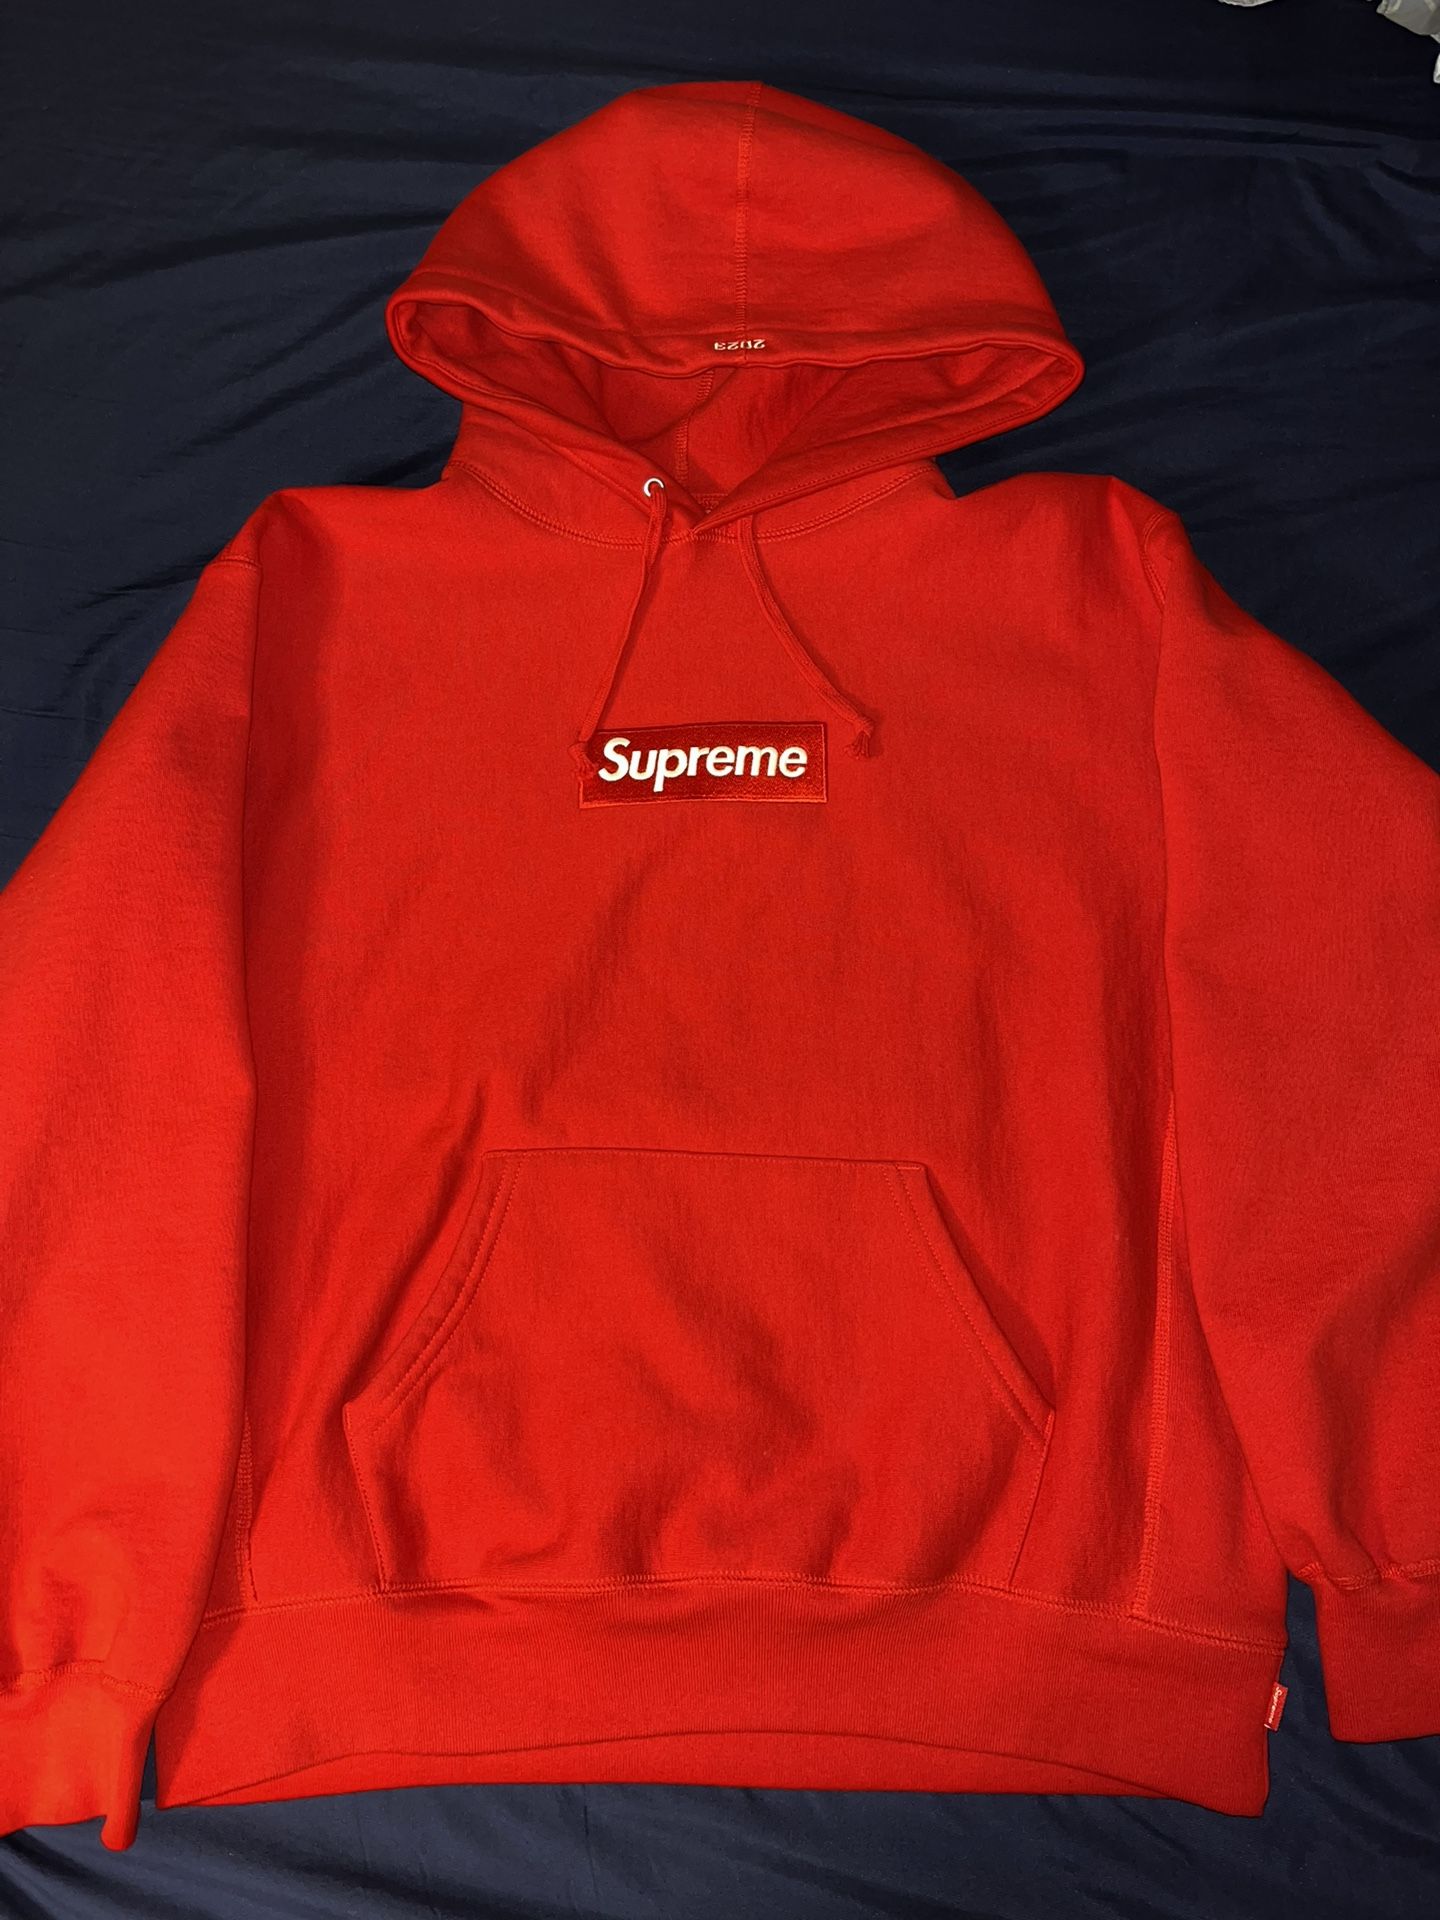 Red Supreme Box logo Hoodie Size Med